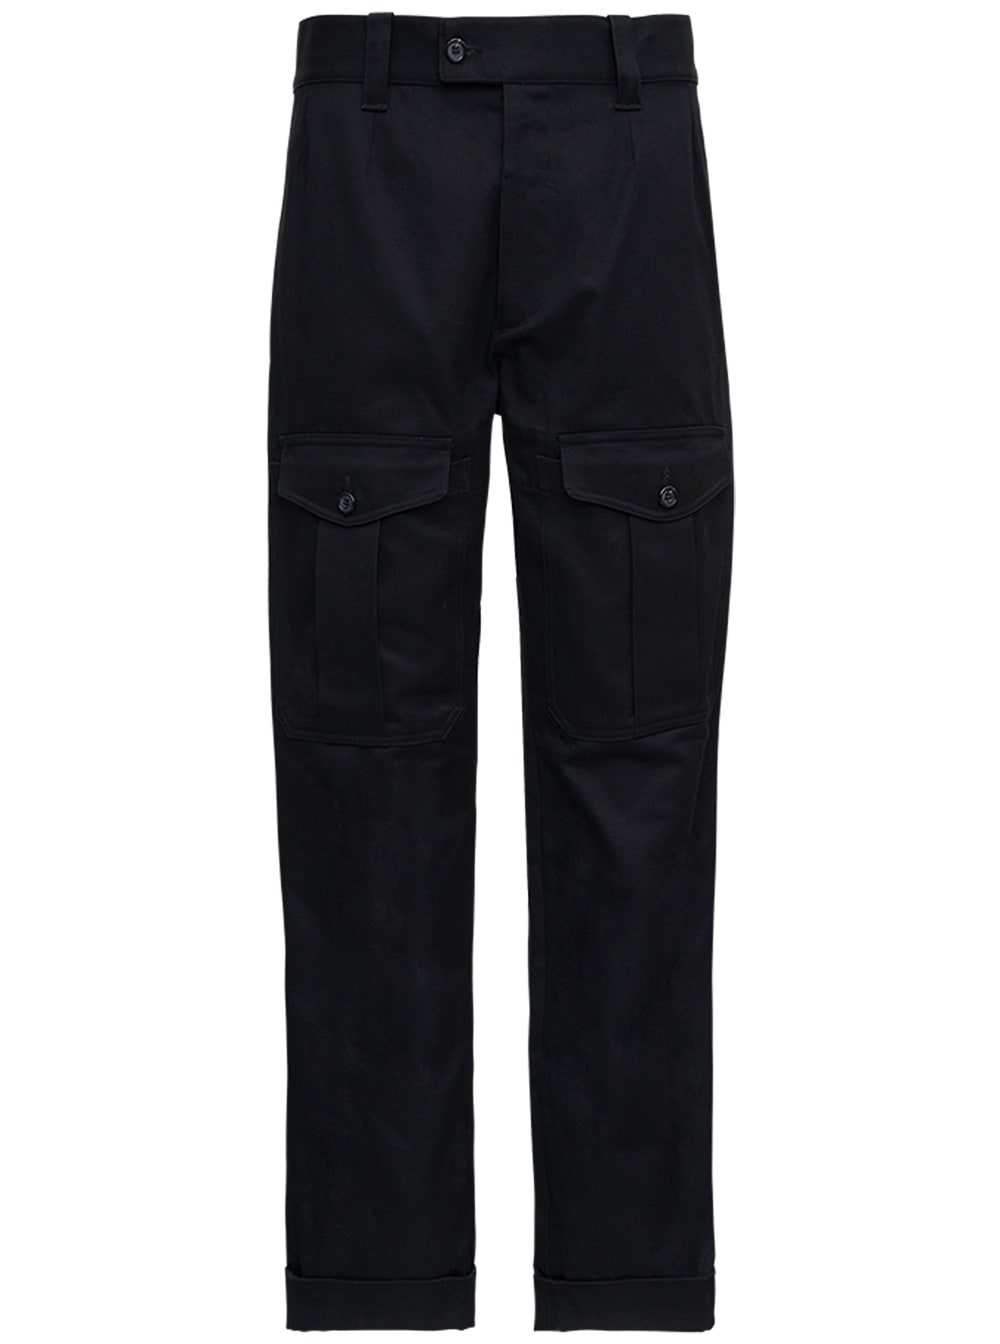 Alexander McQueen Black Cotton Pants With Pockets